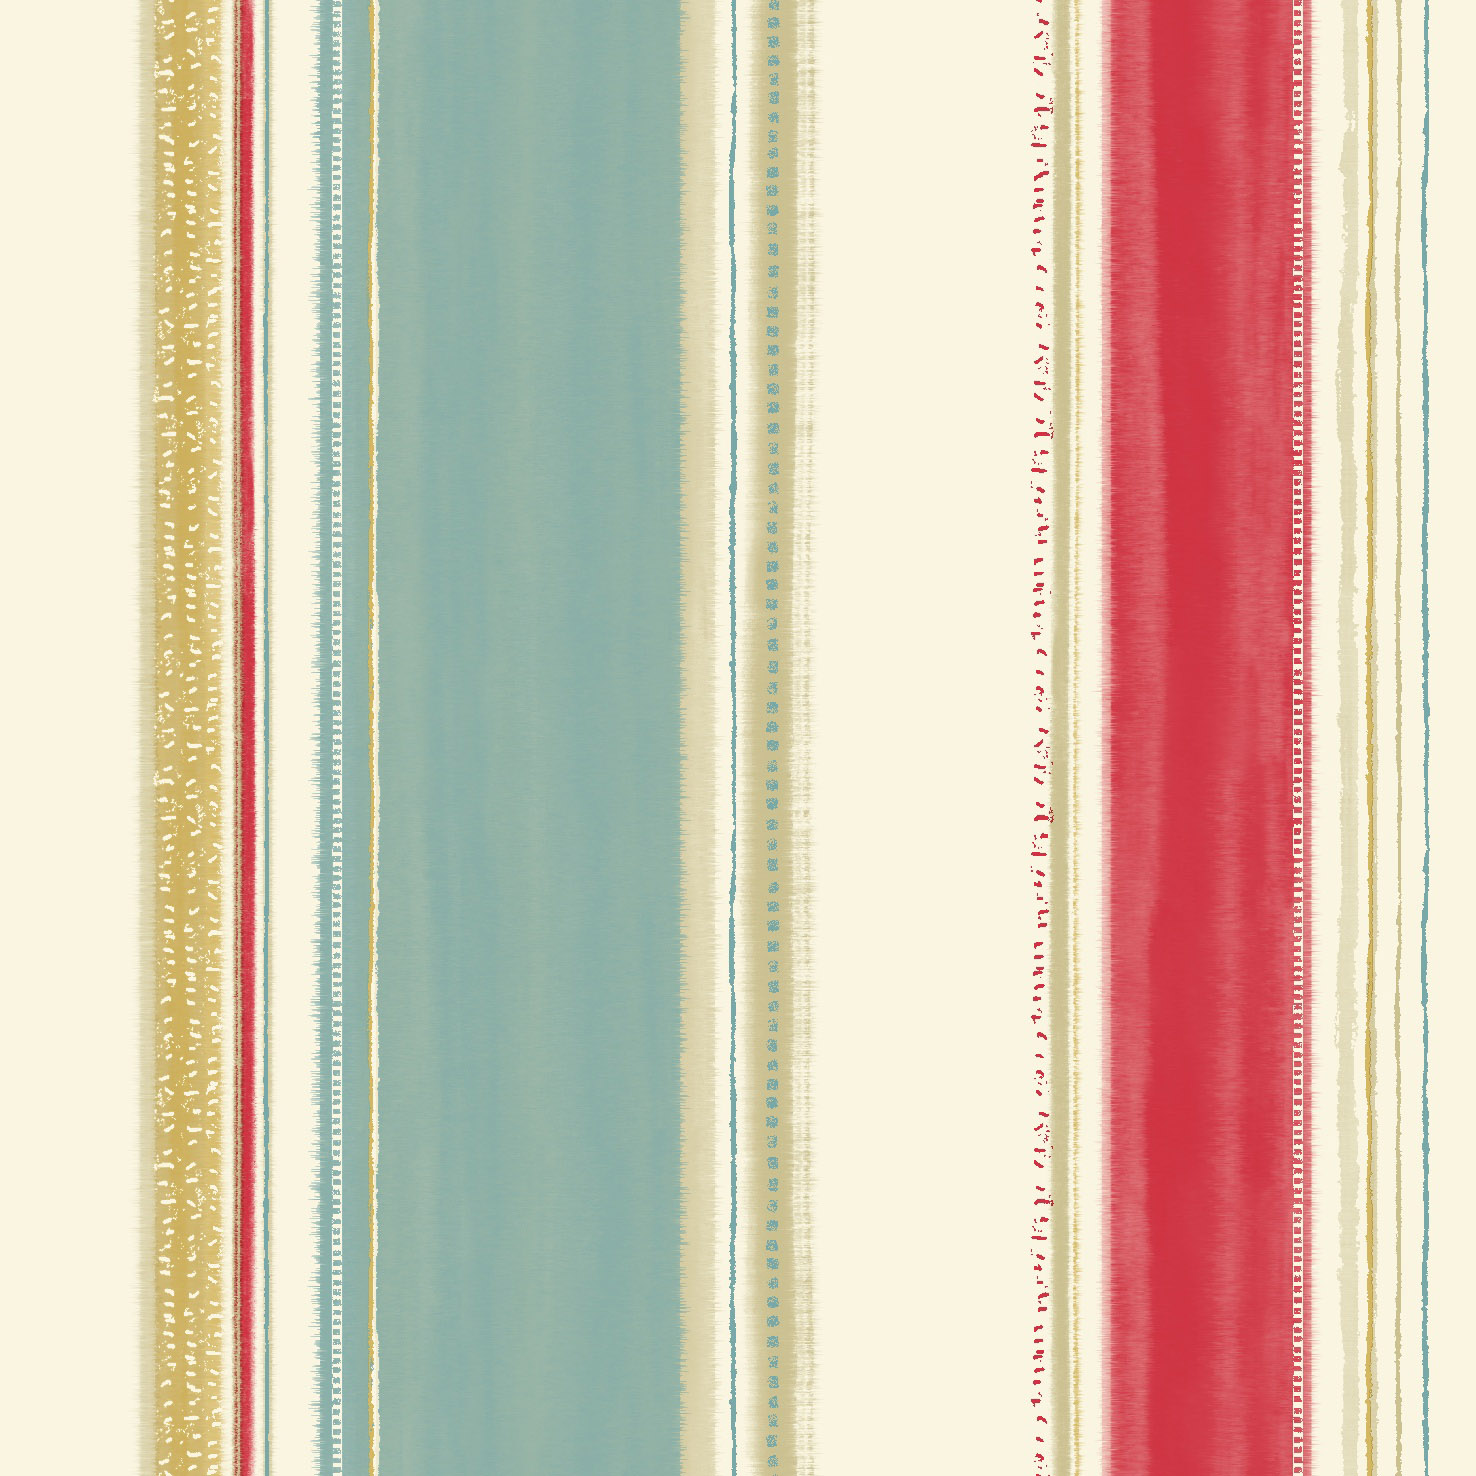  stripe in soft teal red and gold accents on a cream ground